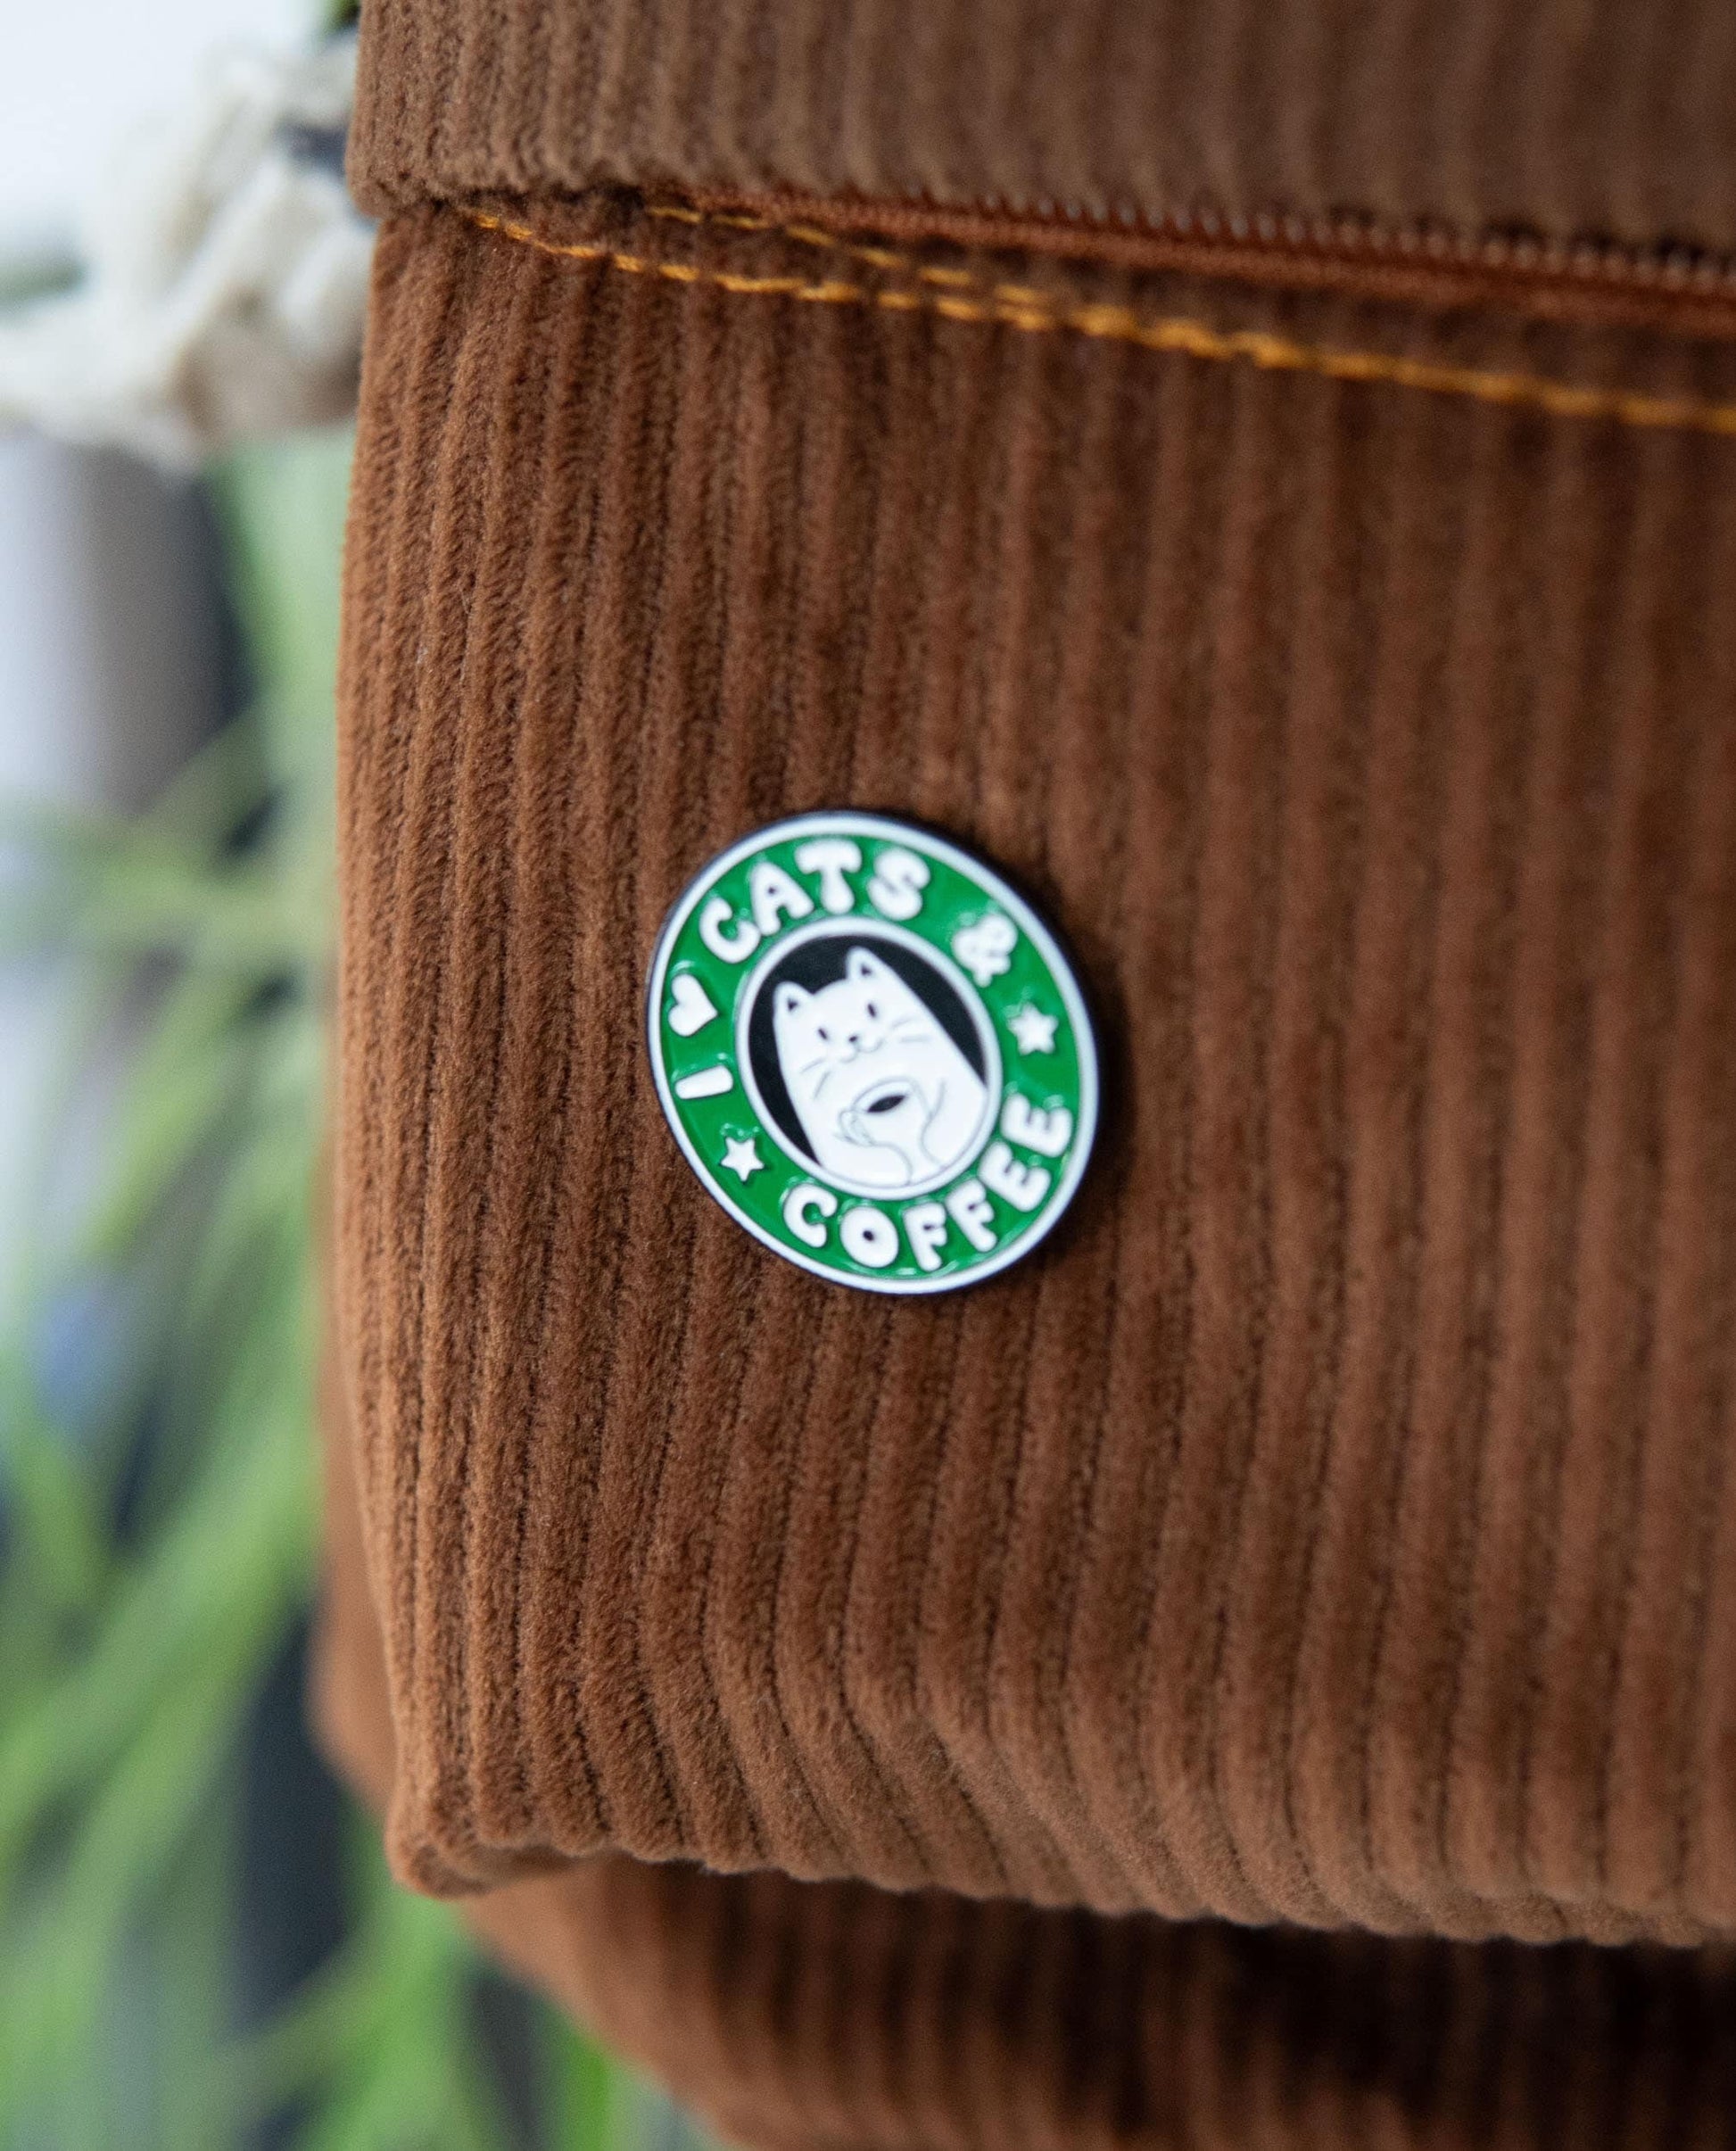 Cats & Coffee Enamel Pin - Perfect Accessory for Cat Lovers and Caffeine Addicts, Ideal for Tote Bags and Beanies